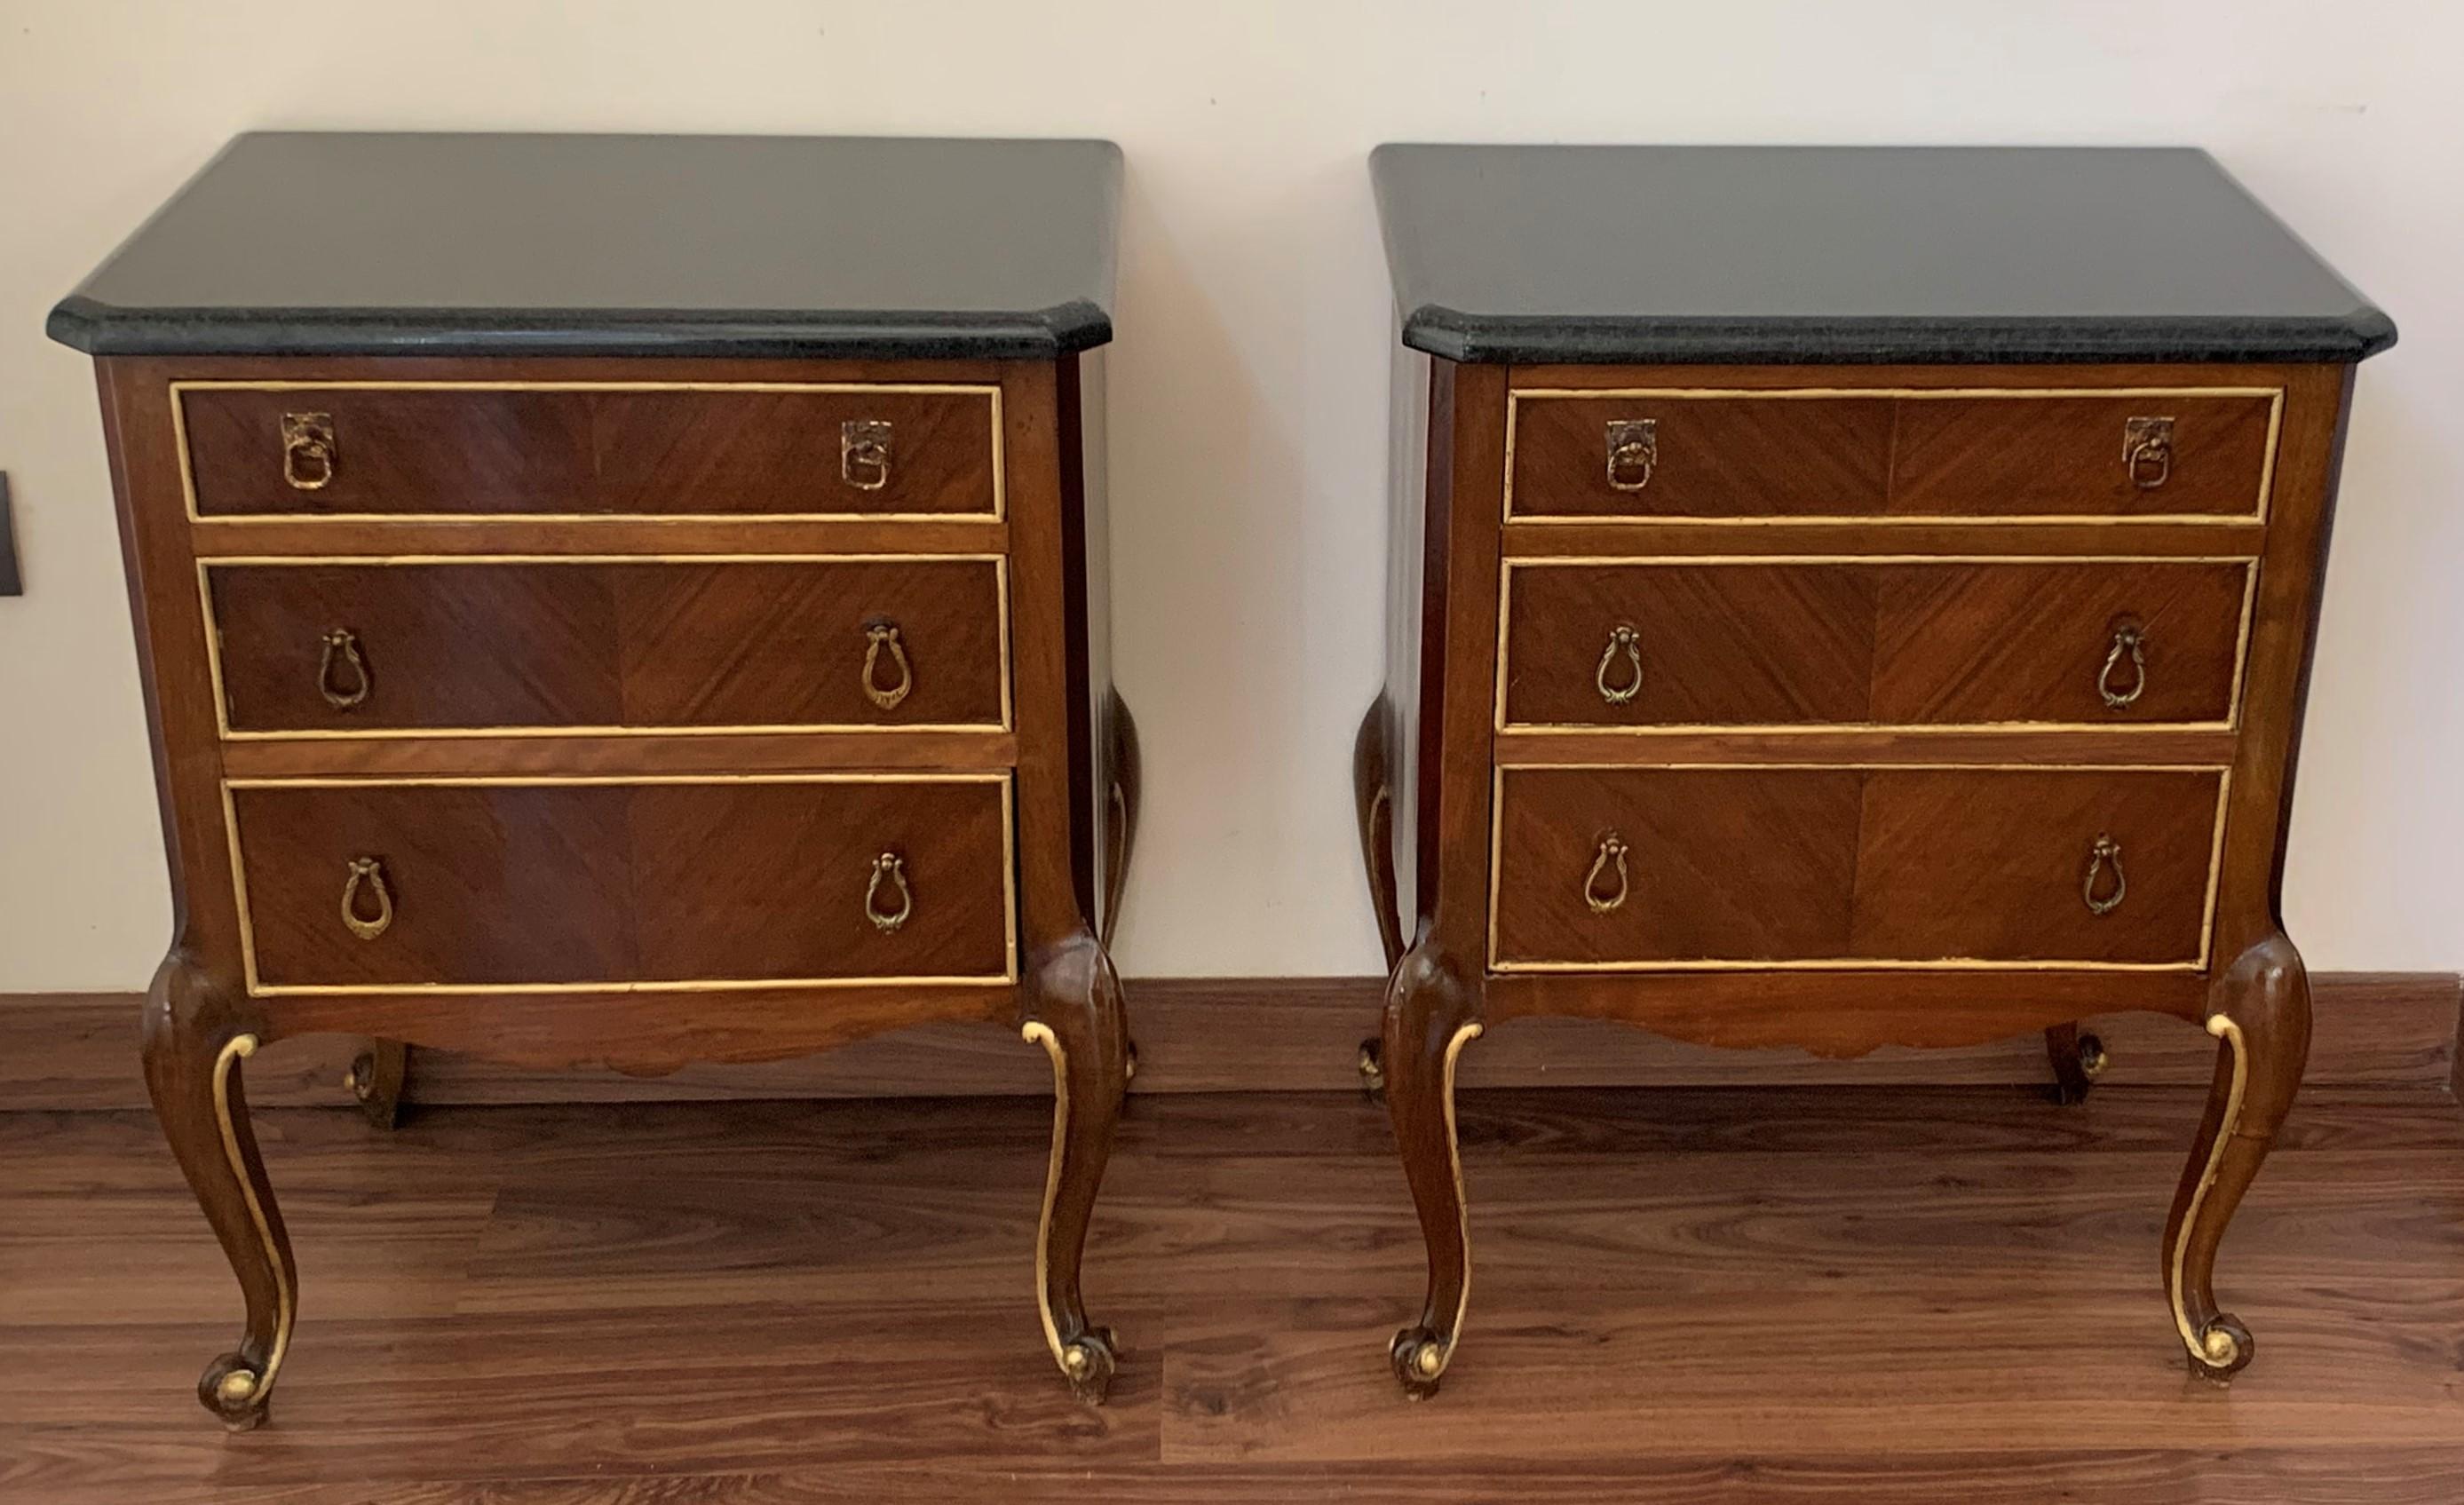 20th French pair of walnut nightstands with three different deep drawers
A petites French walnut three-drawer commodes from the mid-20th century with ribbon-giltwood . This petites French commodes features a rectangular top with beveled edges,